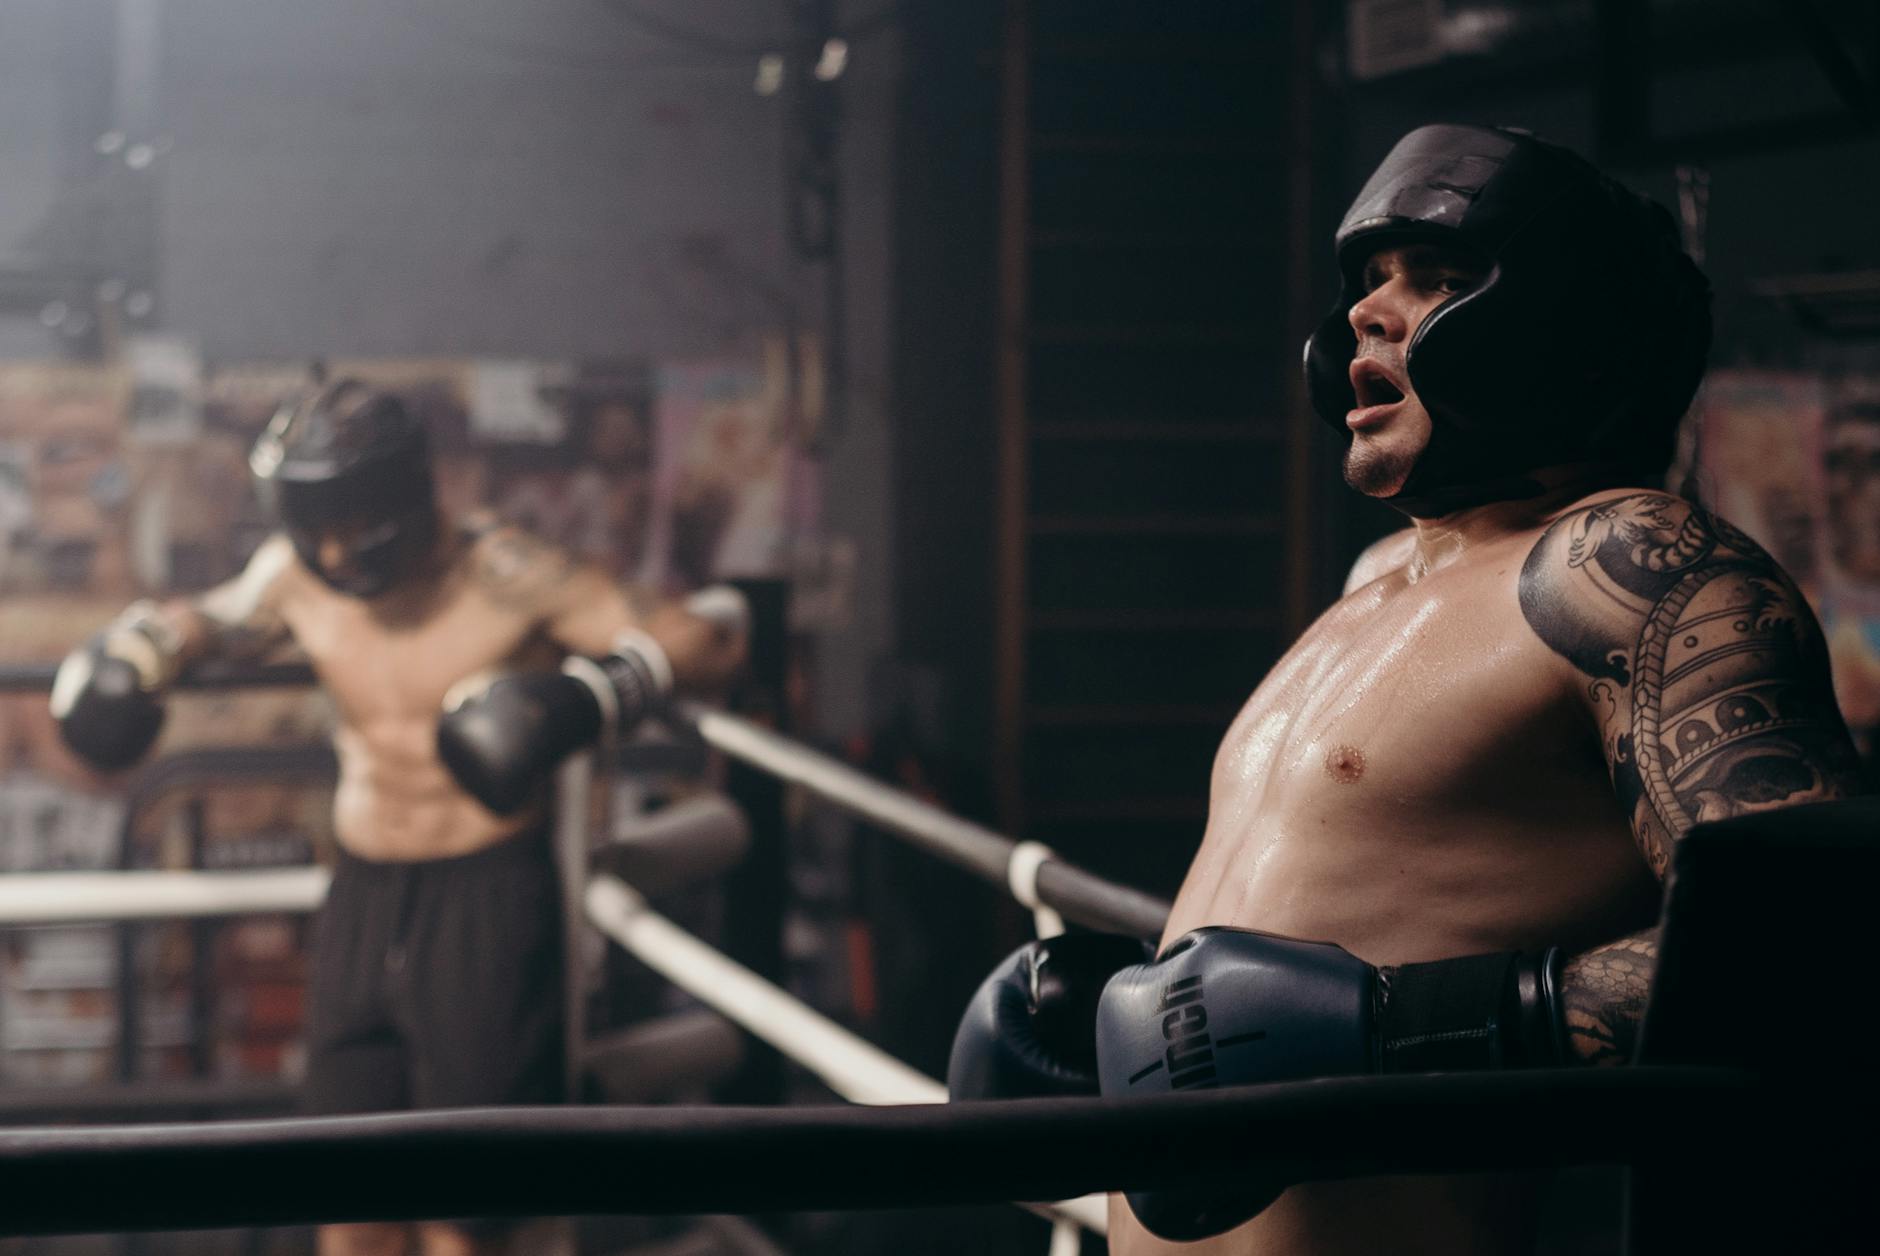 Topless Man Wearing Black Sunglasses and Black Boxing Gloves